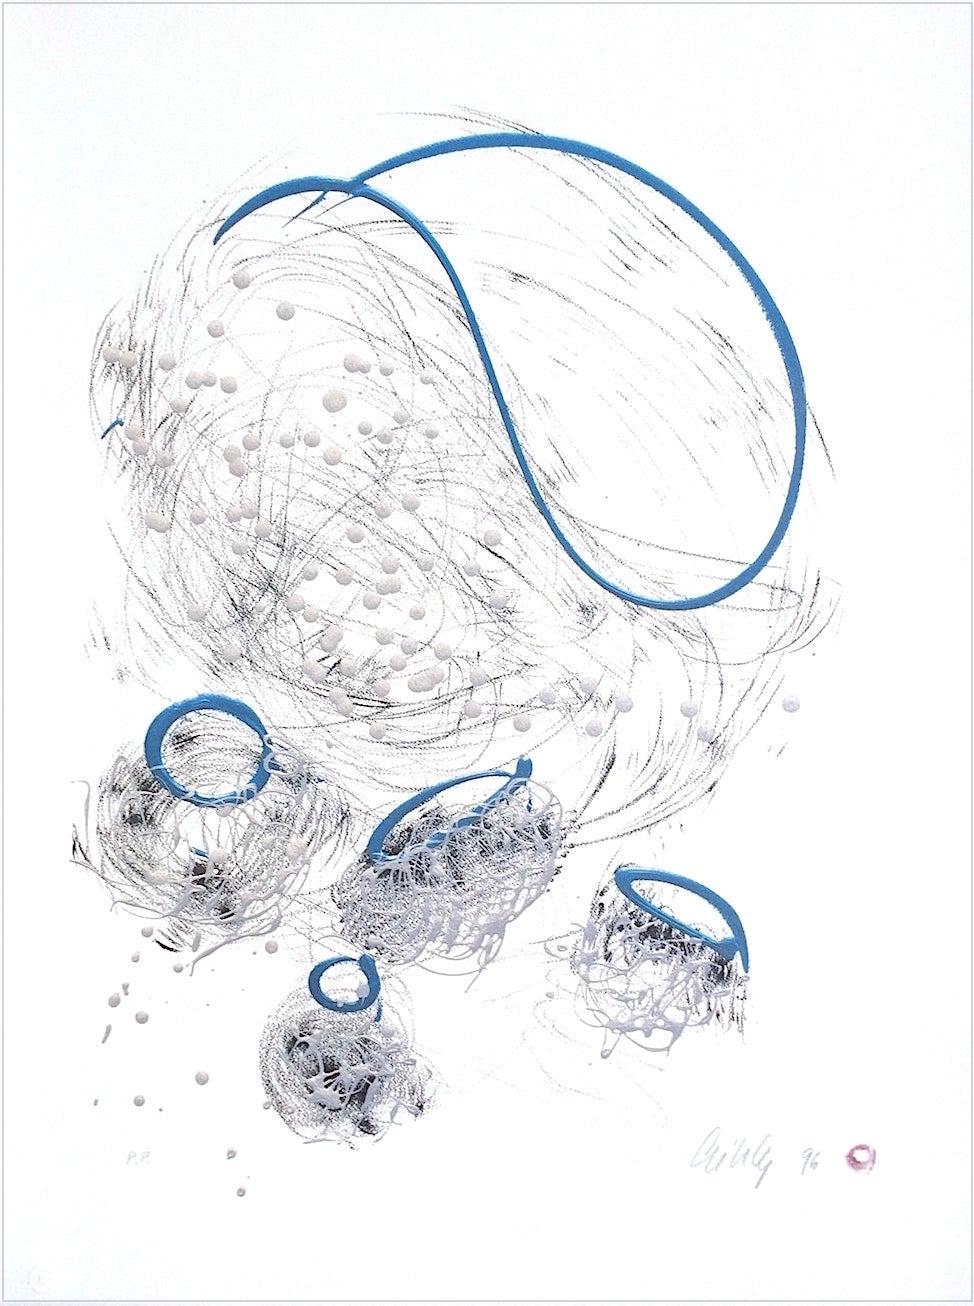 Dale Chihuly Print - BASKET DRAWING Signed Lithograph, Freeform Basket, Pearlescent blue accents 